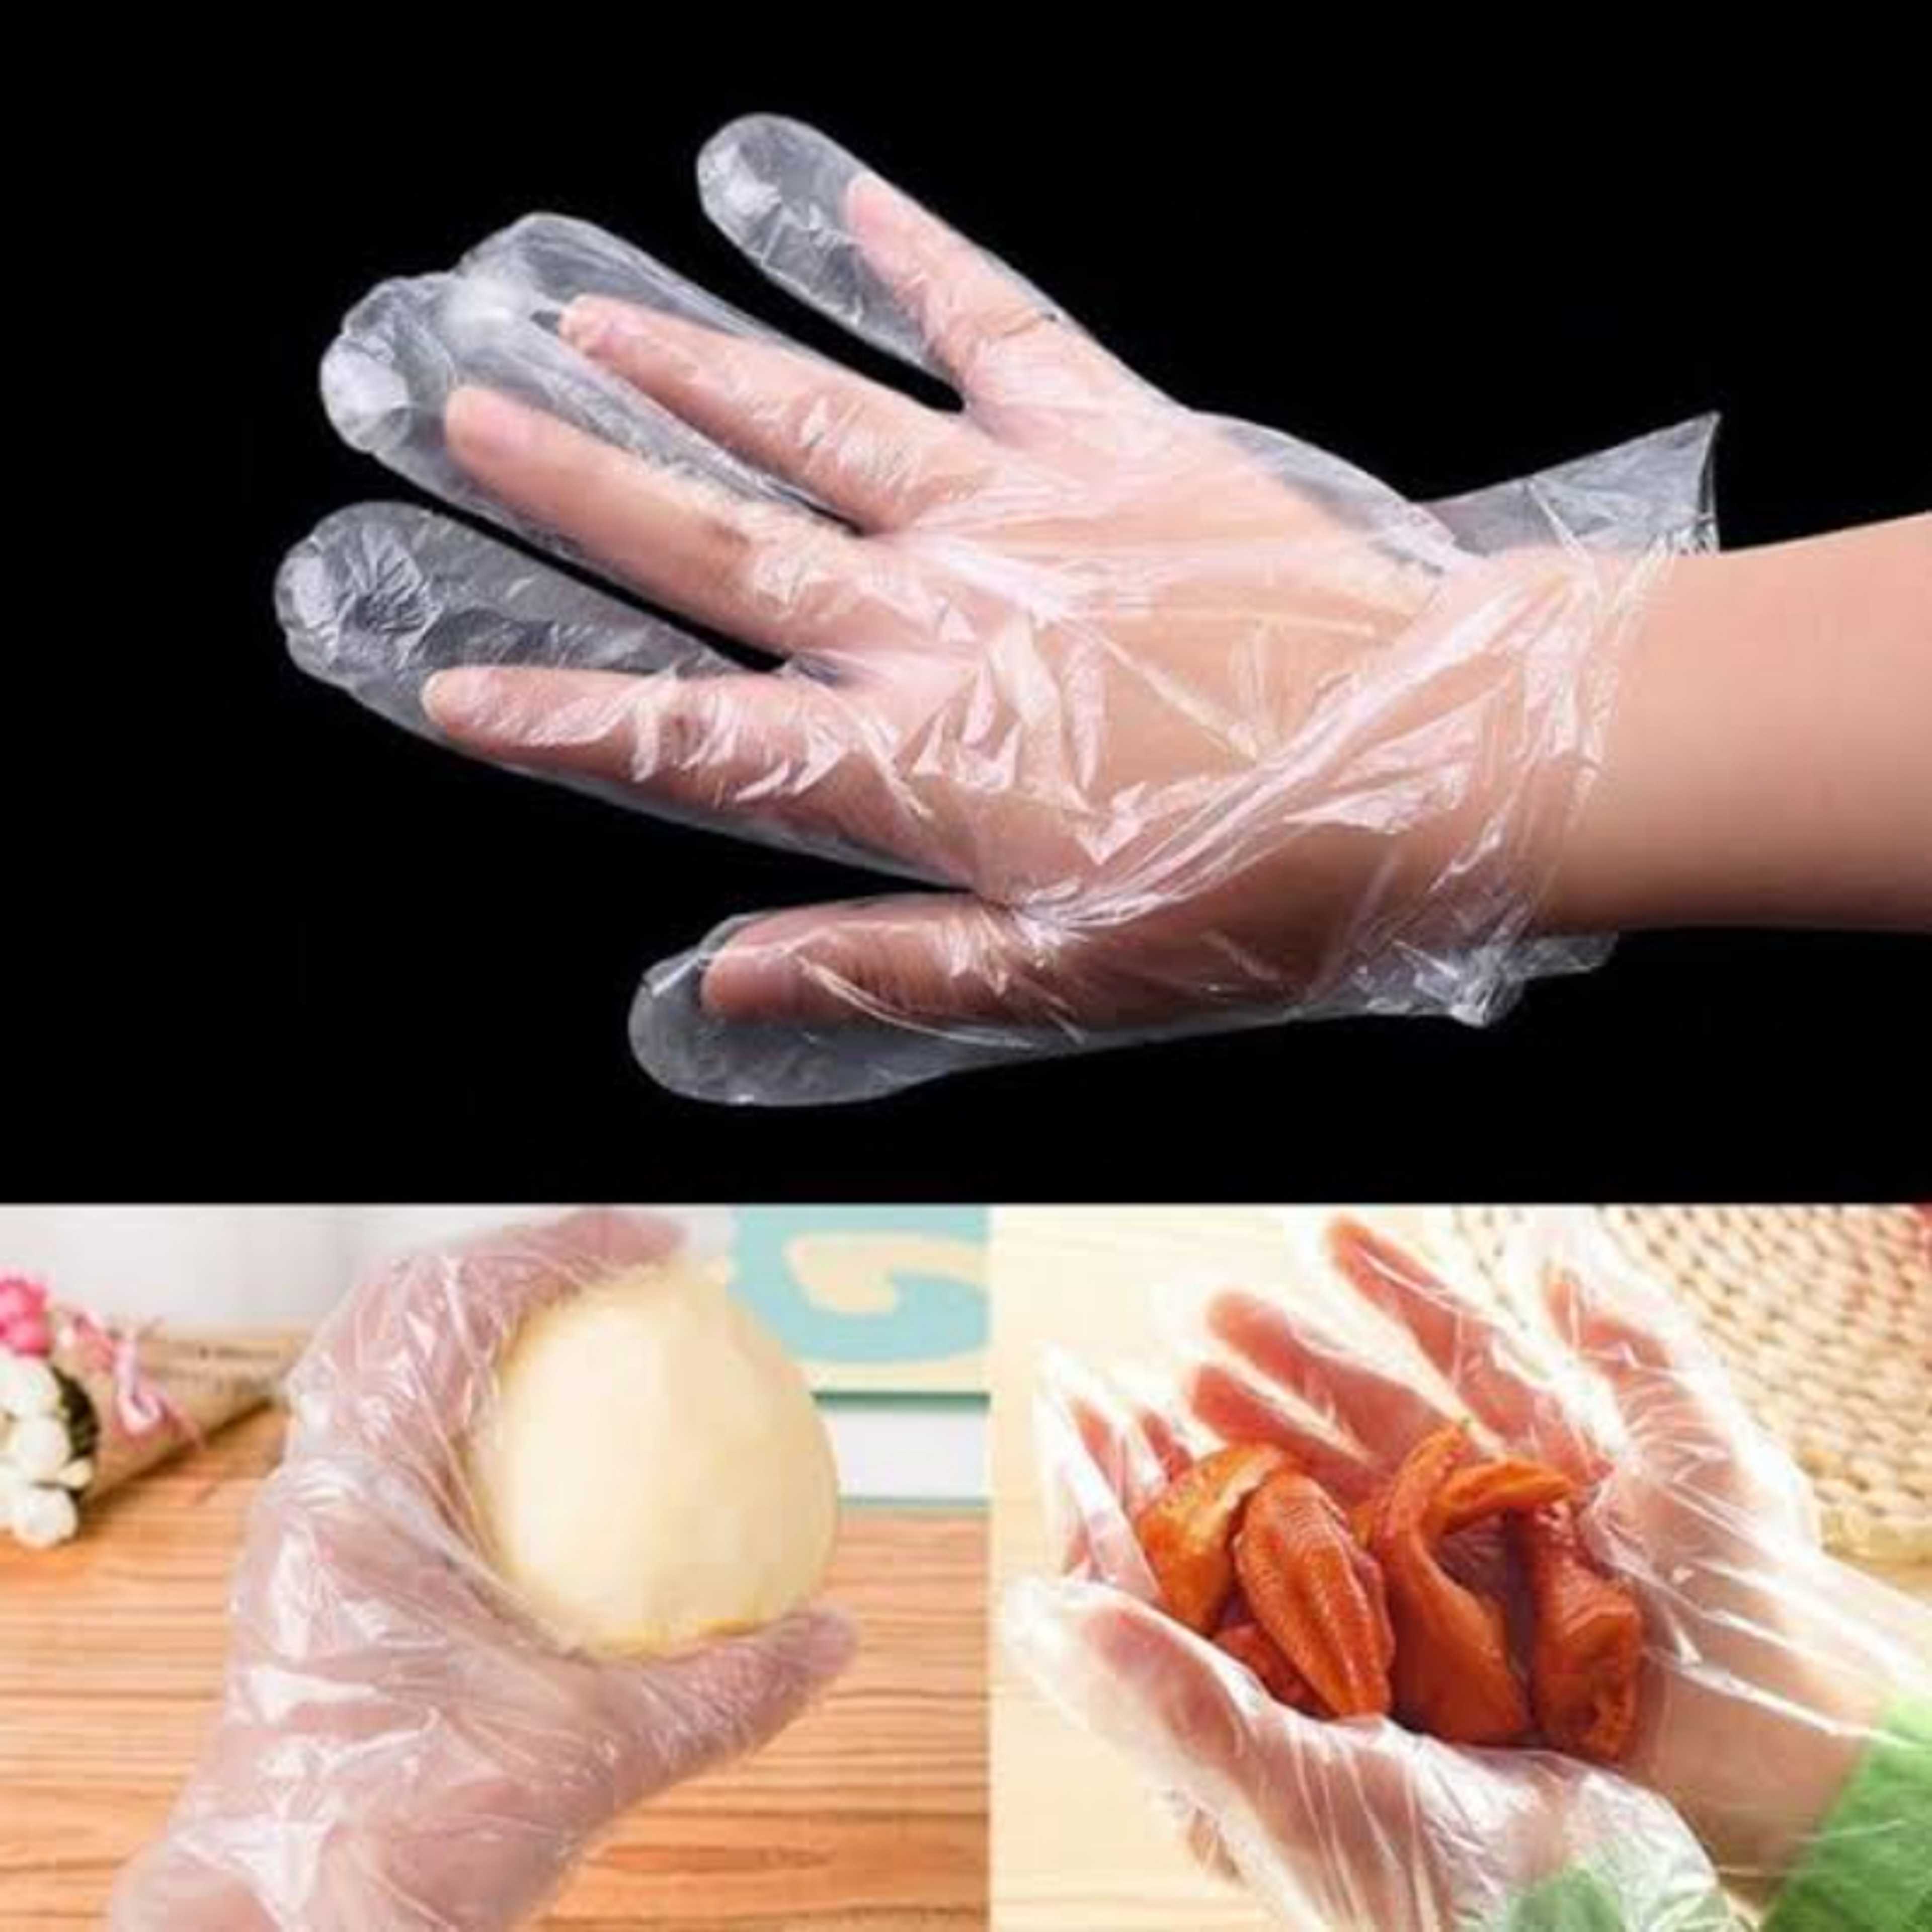 100 Pcs Disposable Polythene Plastic Gloves Clear Disposable Glove For Home Kitchen Dining Hotel and Restaurant